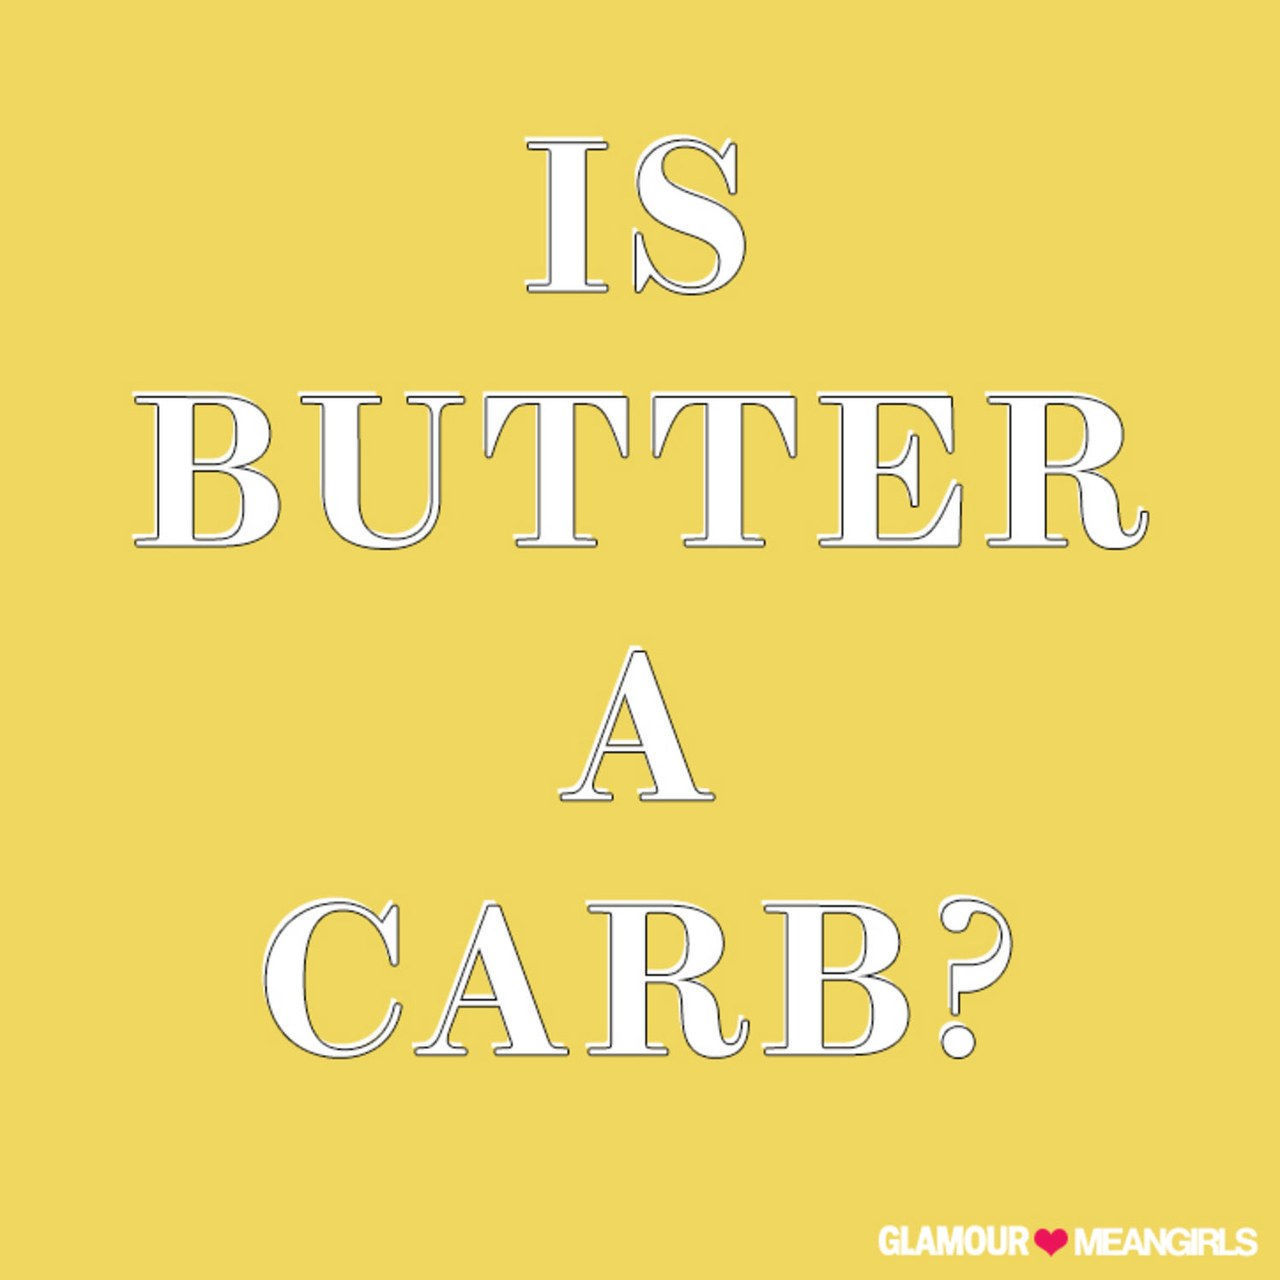 je butter a carb